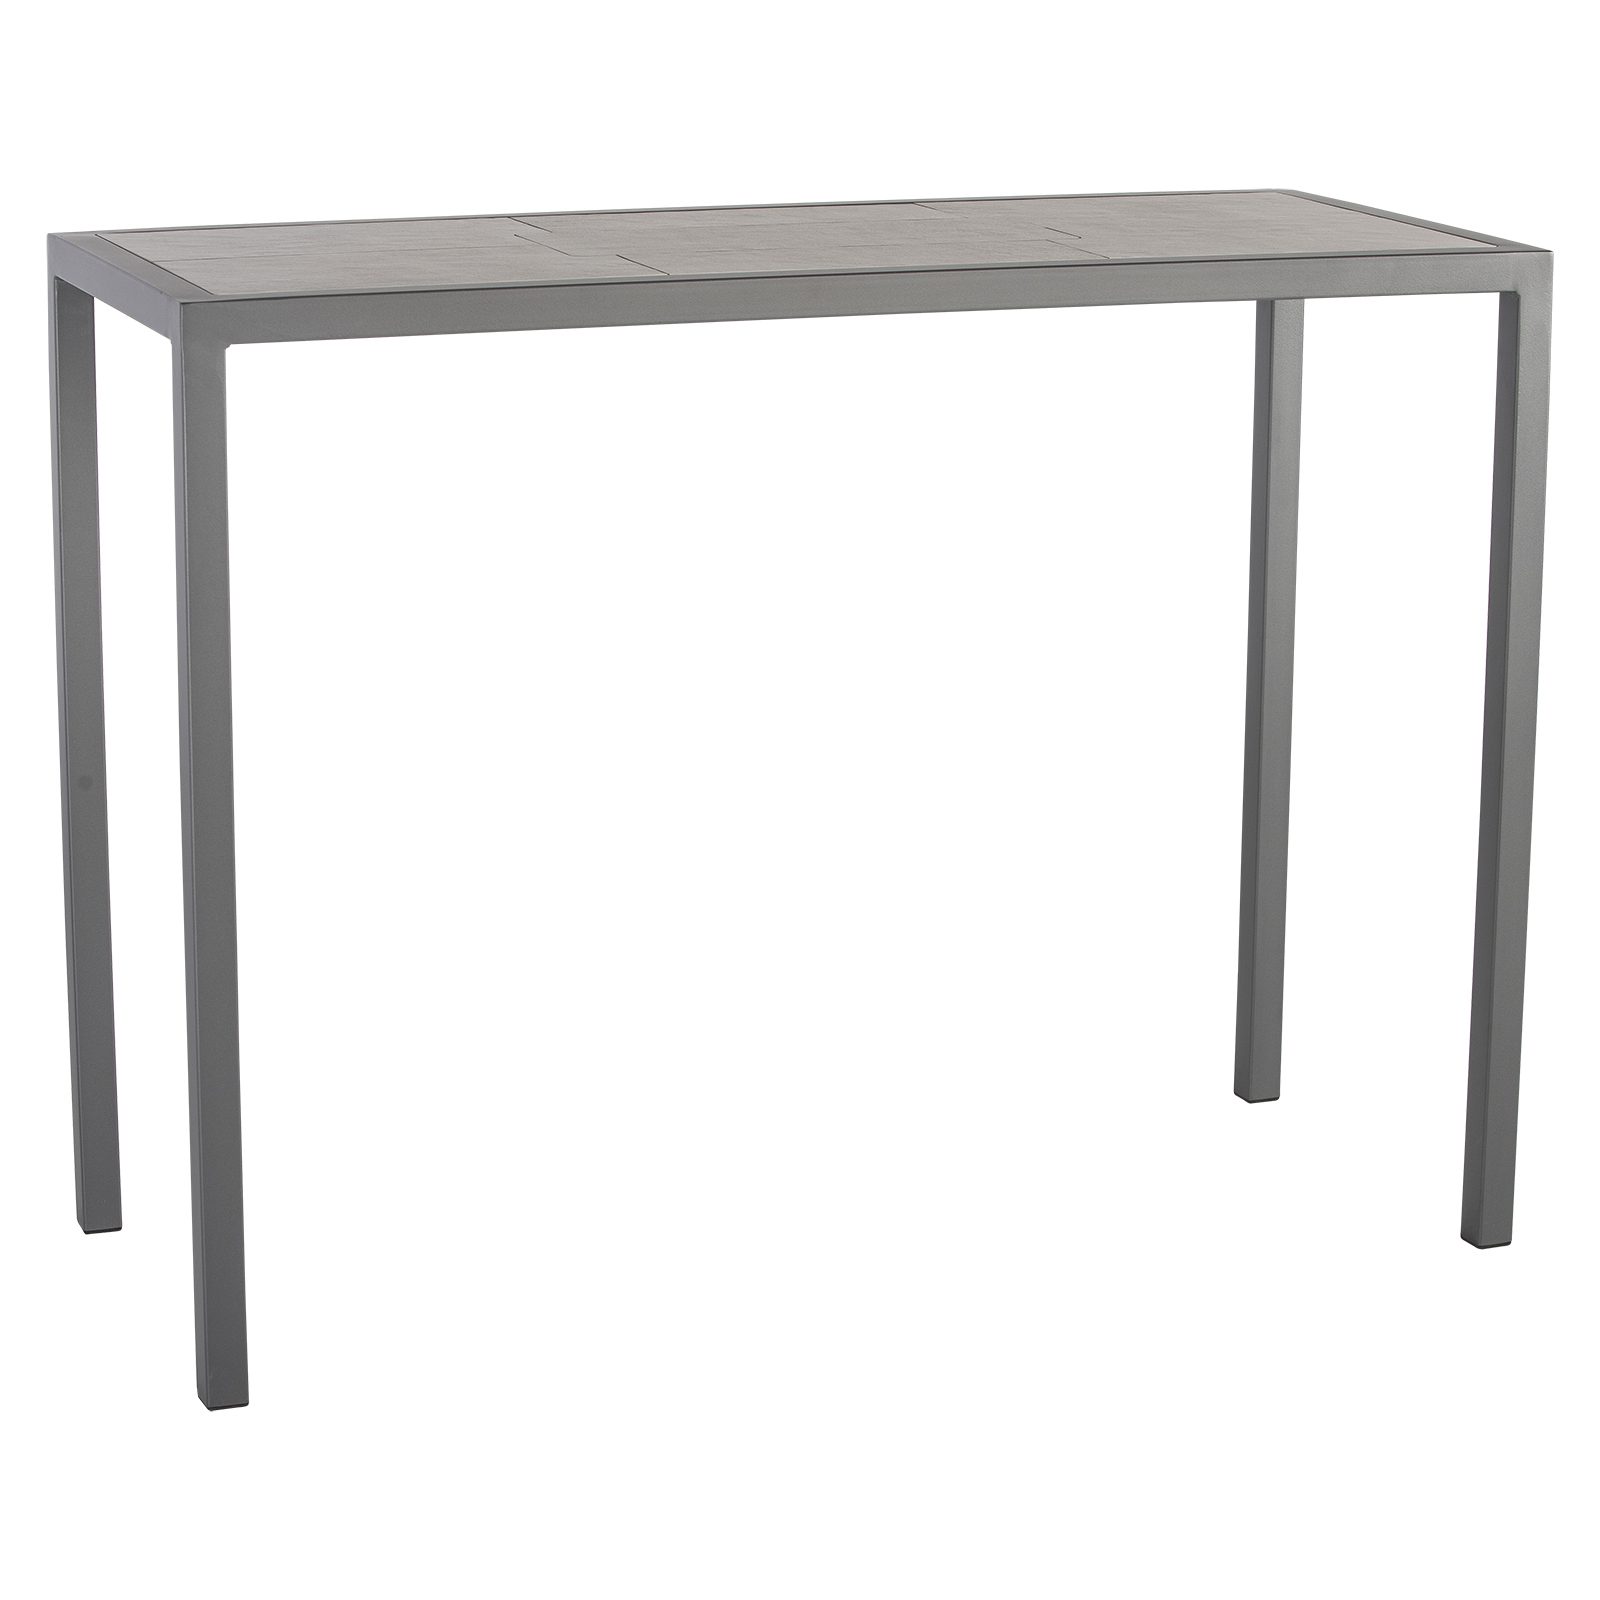 21" x 57" Counter Table - Fully Welded Tables - Quadra Iron Tables 13